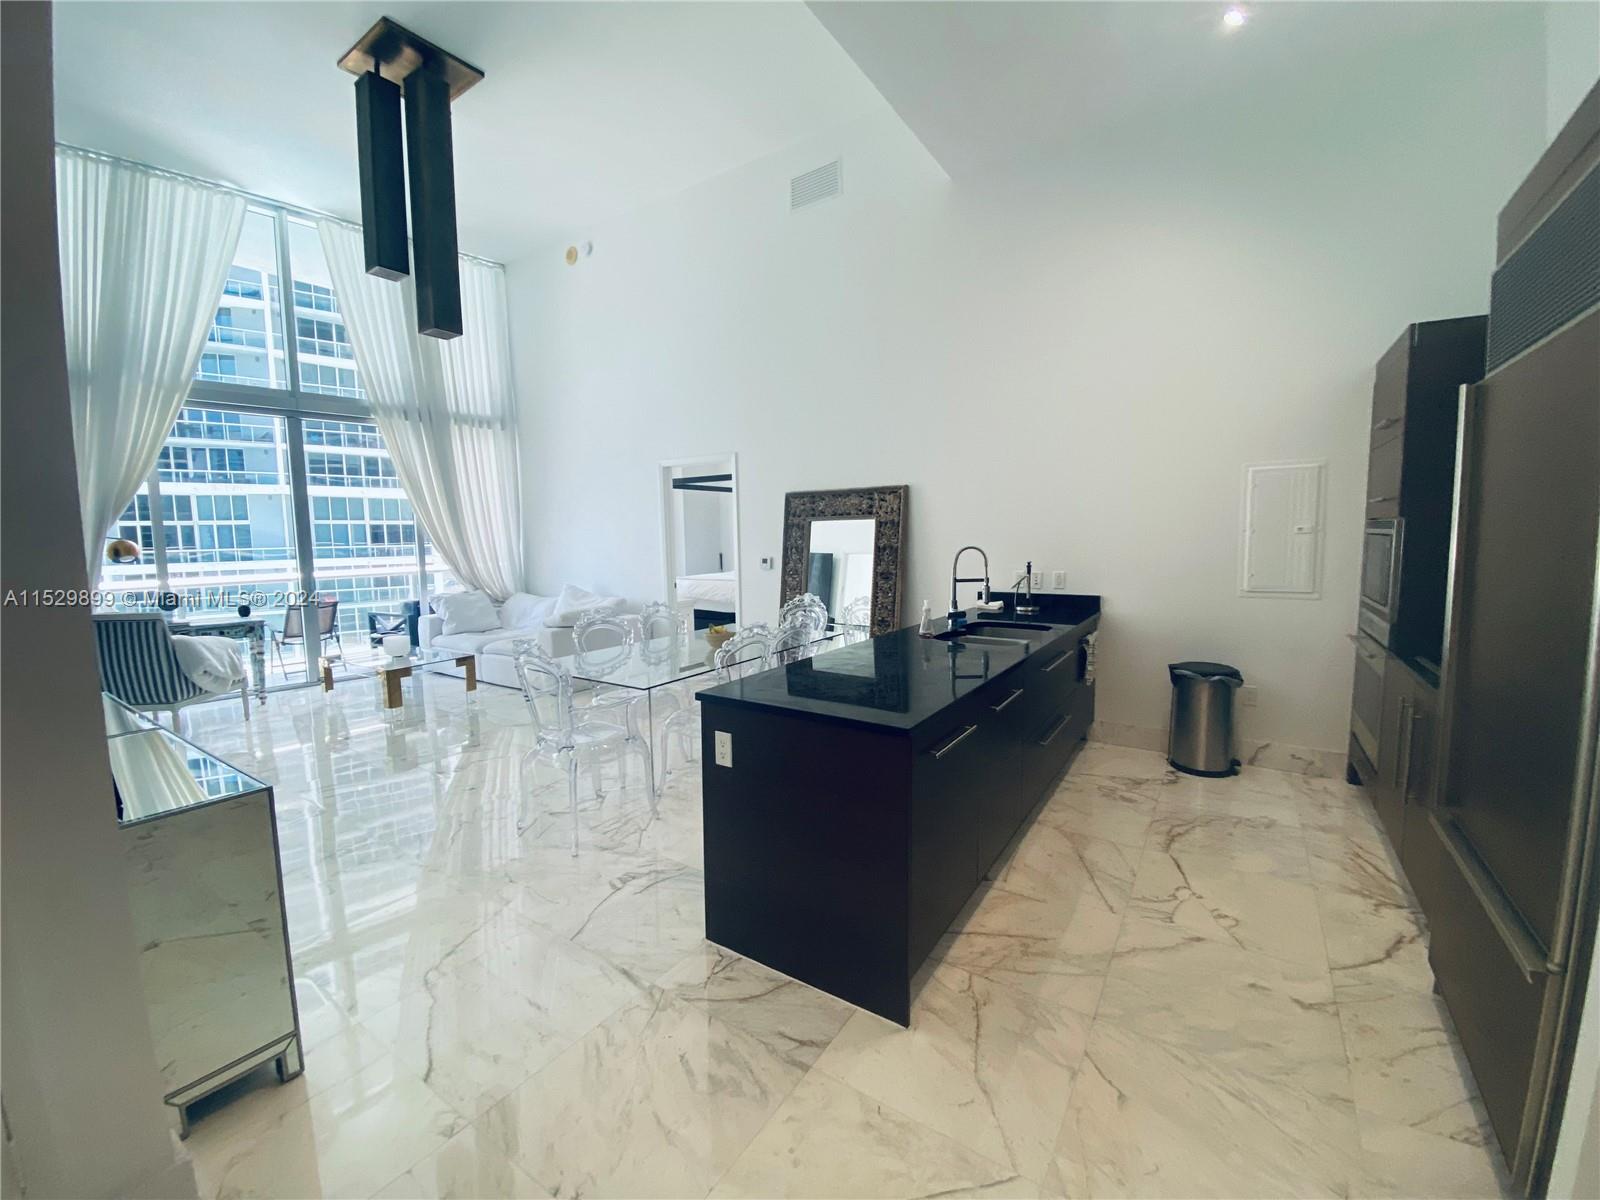 ABSOLUTELY STUNNING DOUBLE HEIGHT 2BR/2BA + DEN... MARBLE FLOORING THROUGHOUT & CUSTOM DESIGNER LIGHTING FIXTURES.. ENJOY SPECTACULAR VIEWS OVERLOOKING THE ICON BRICKELL POOL AND BISCAYNE BAY. WOLF AND SUBZERO APPLIANCES. 5STAR AMENITIES INCLUDING STATE OF THE ARTS FITNESS CENTER, INFINITY POOL, CIPRIANI'S, CANTINA VIENTE & ADDIKT ALL ON PREMISES. WALKING DISTANCE TO BRICKELL CITY CENTER, ENDLESS RESTAURANTS, SHOPPING AND THE MIAMI FINANCIAL DISTRICT.